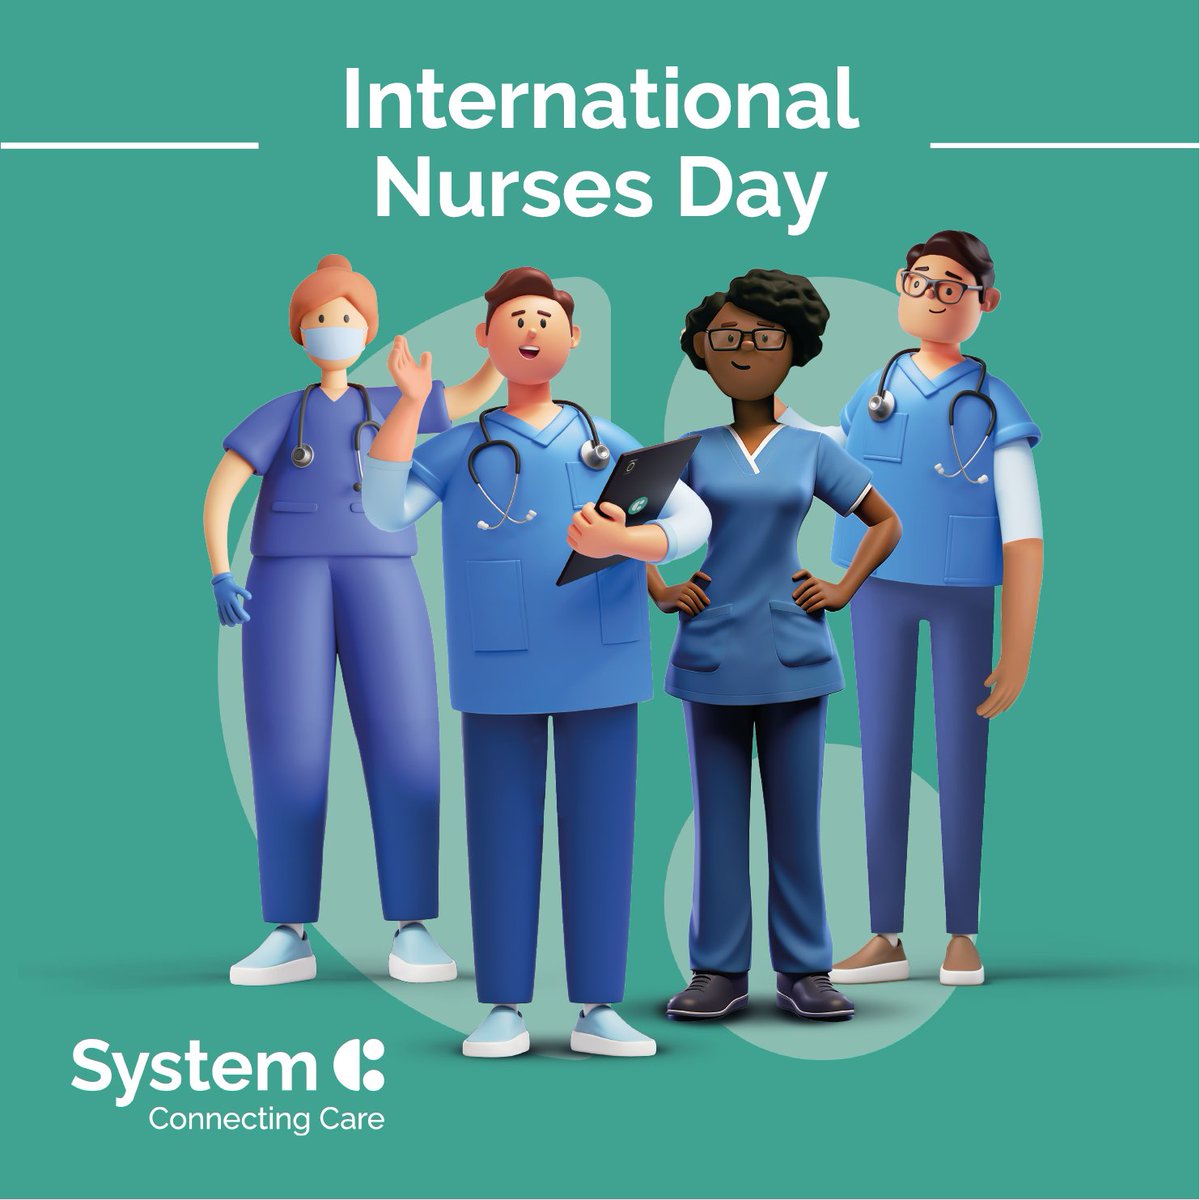 Today is International Nurses Day! 👨🏼‍⚕️👩🏾‍⚕️ Today let us express our gratitude to nurses across the globe for their resilience, compassion, and dedication 💚 We decided to ask our beloved community of Nurses and Midwives some fun icebreaker questions...🥶 bit.ly/4bc9FvS